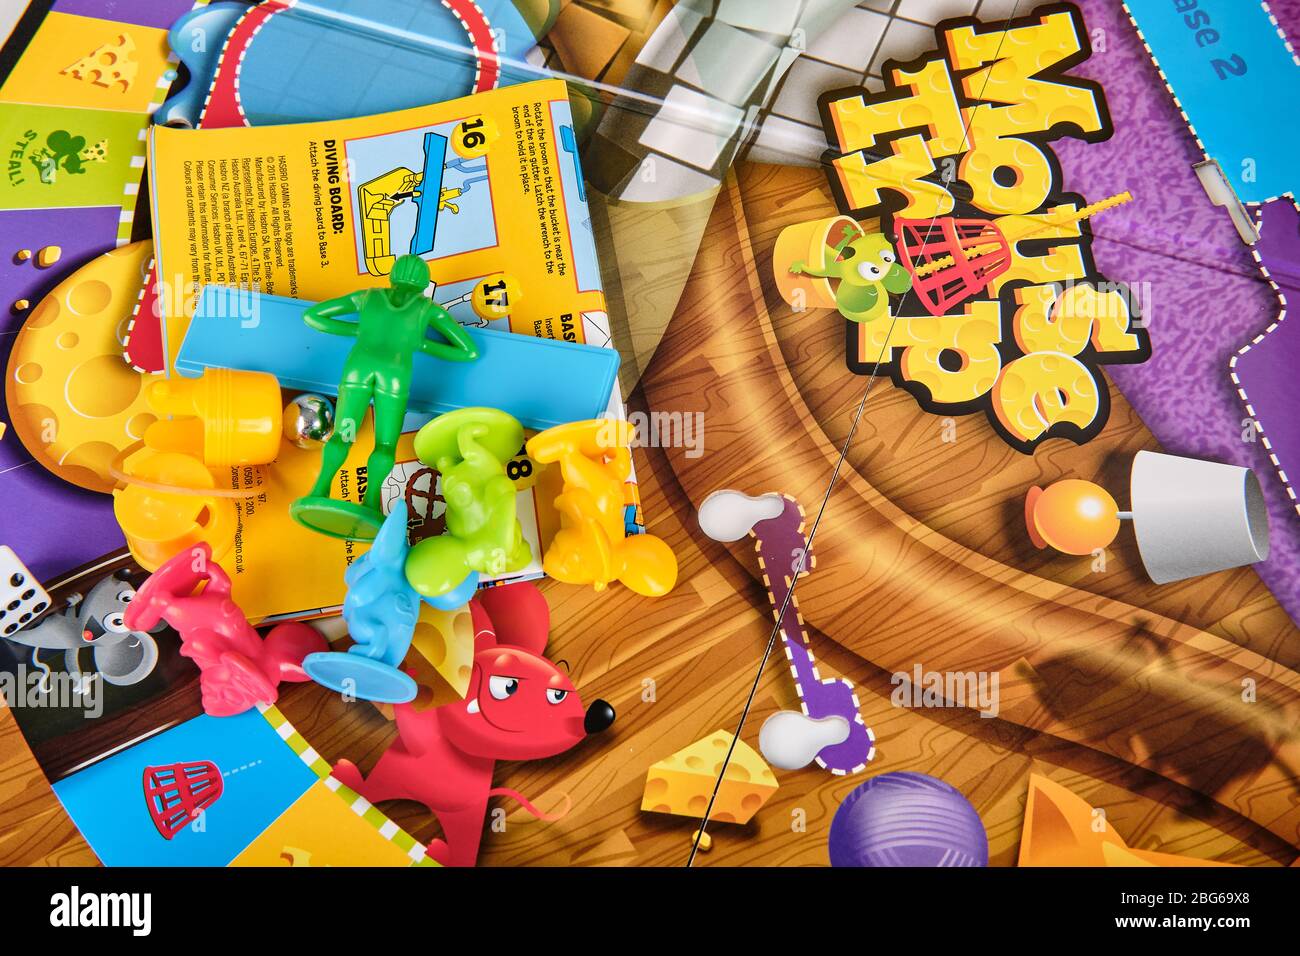 https://c8.alamy.com/comp/2BG69X8/close-up-of-hasbro-mouse-trap-board-game-board-and-game-pieces-ready-to-be-assembled-2BG69X8.jpg